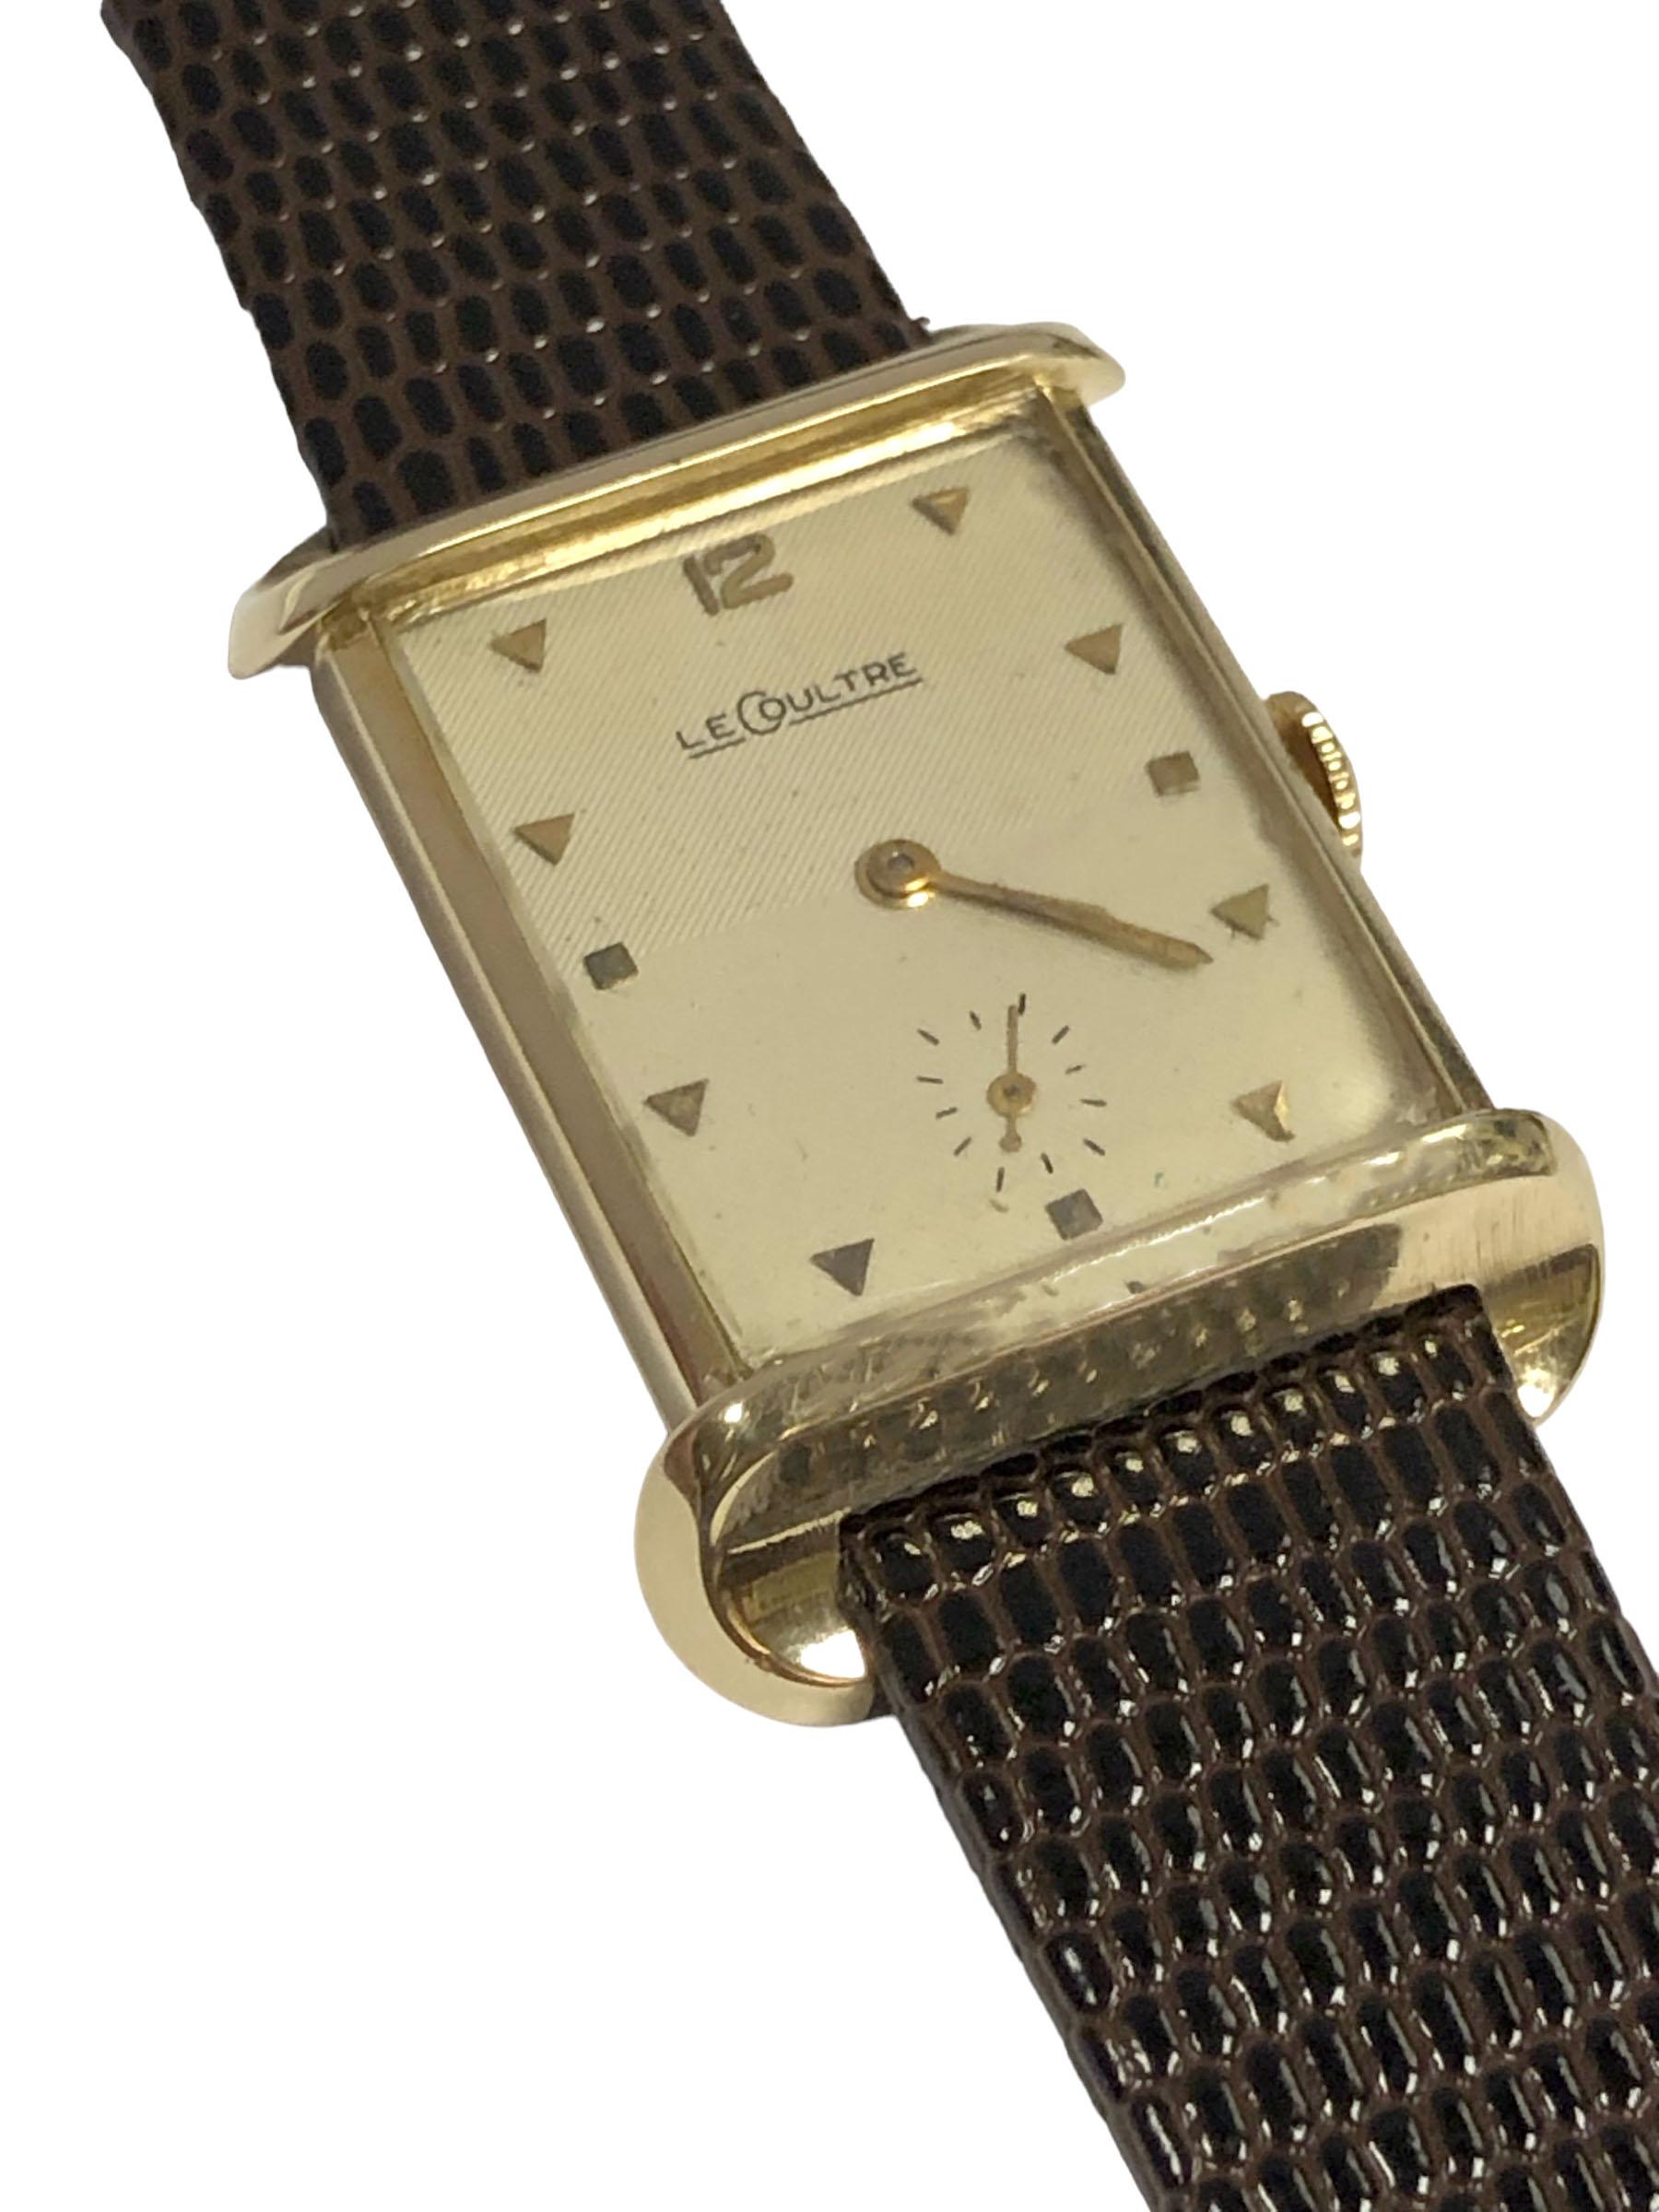 LeCoultre 1950 Yellow Gold Tank Mechanical Wrist Watch In Excellent Condition For Sale In Chicago, IL